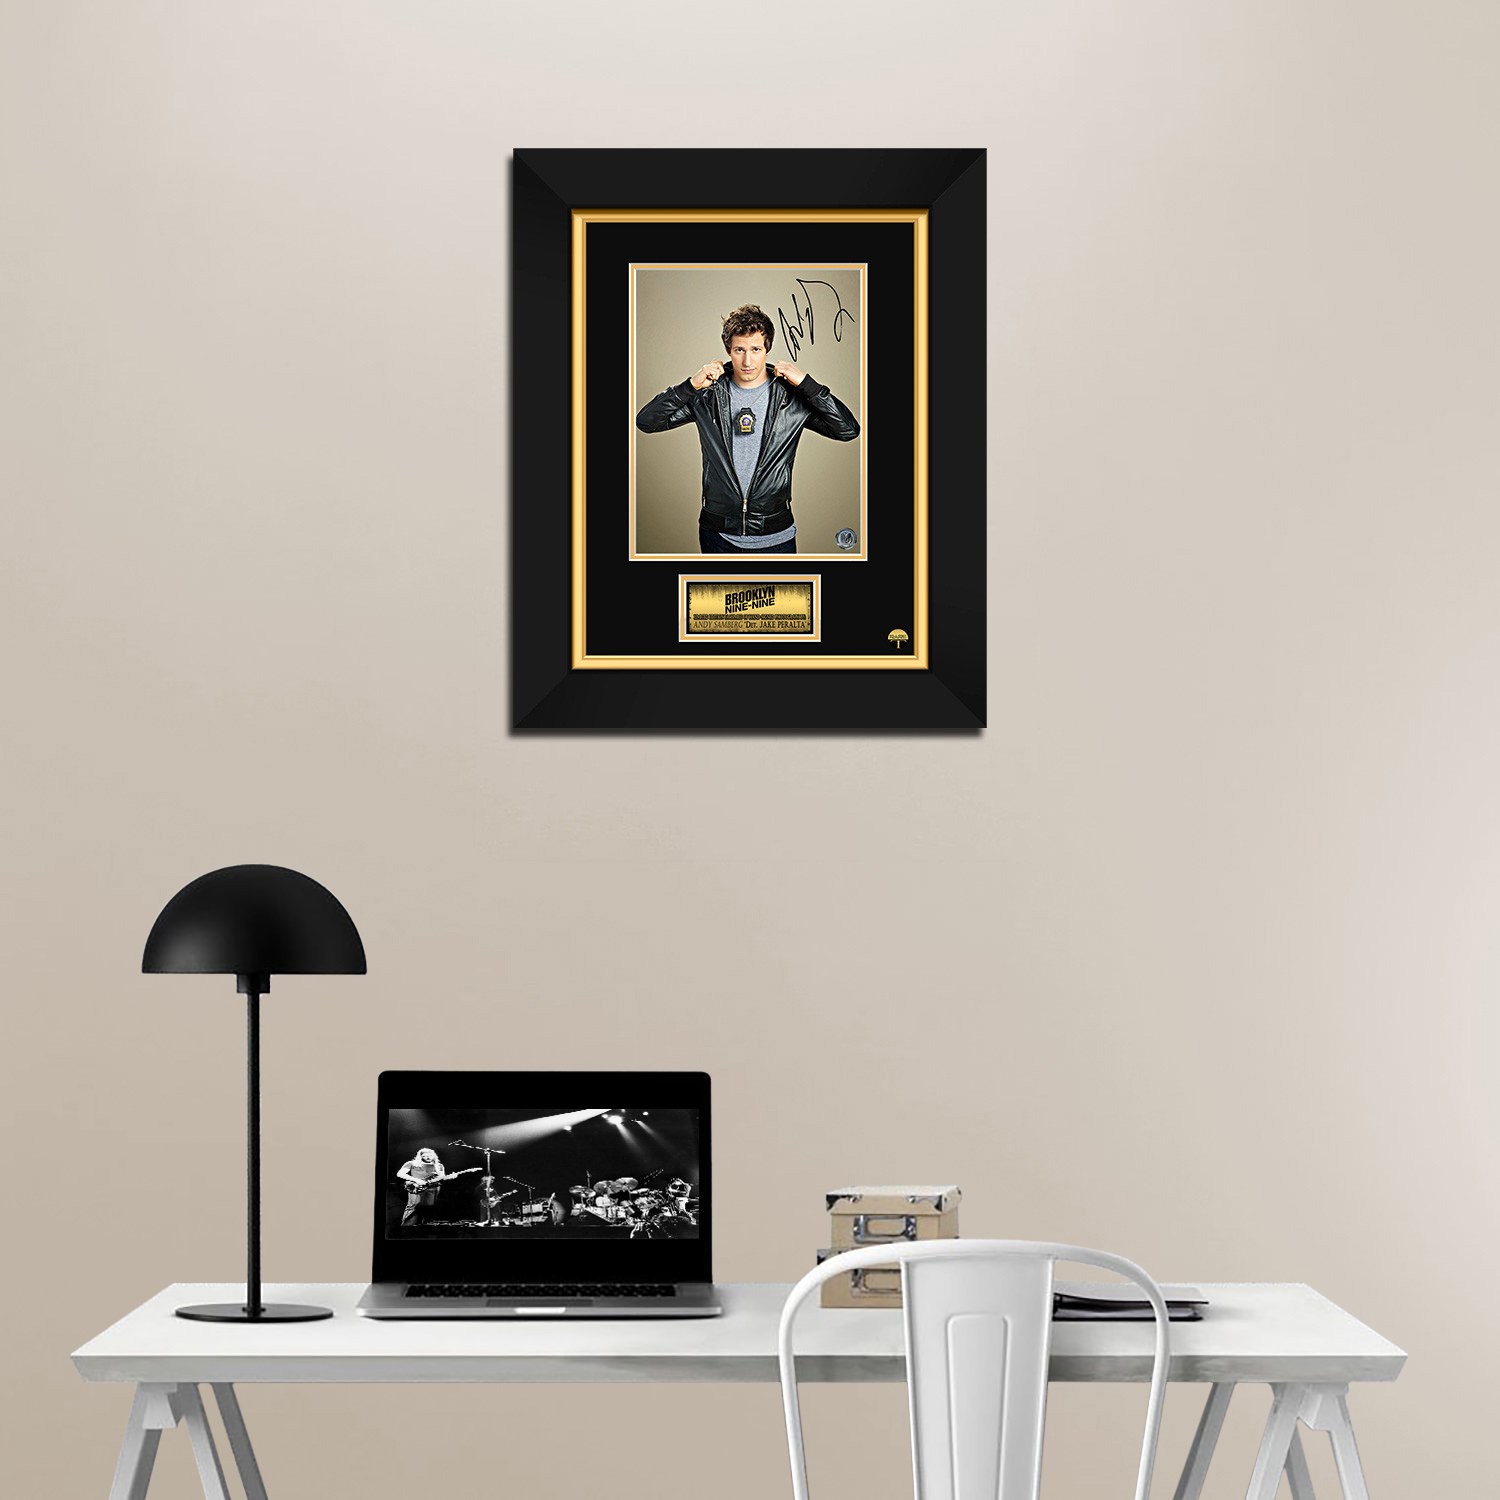  HWC Trading Brooklyn Nine-Nine Andy Samberg 16 x 12 inch Framed  Gifts Printed Signed Autograph Picture for TV Memorabilia Fans - 16 x 12  Framed : Home & Kitchen